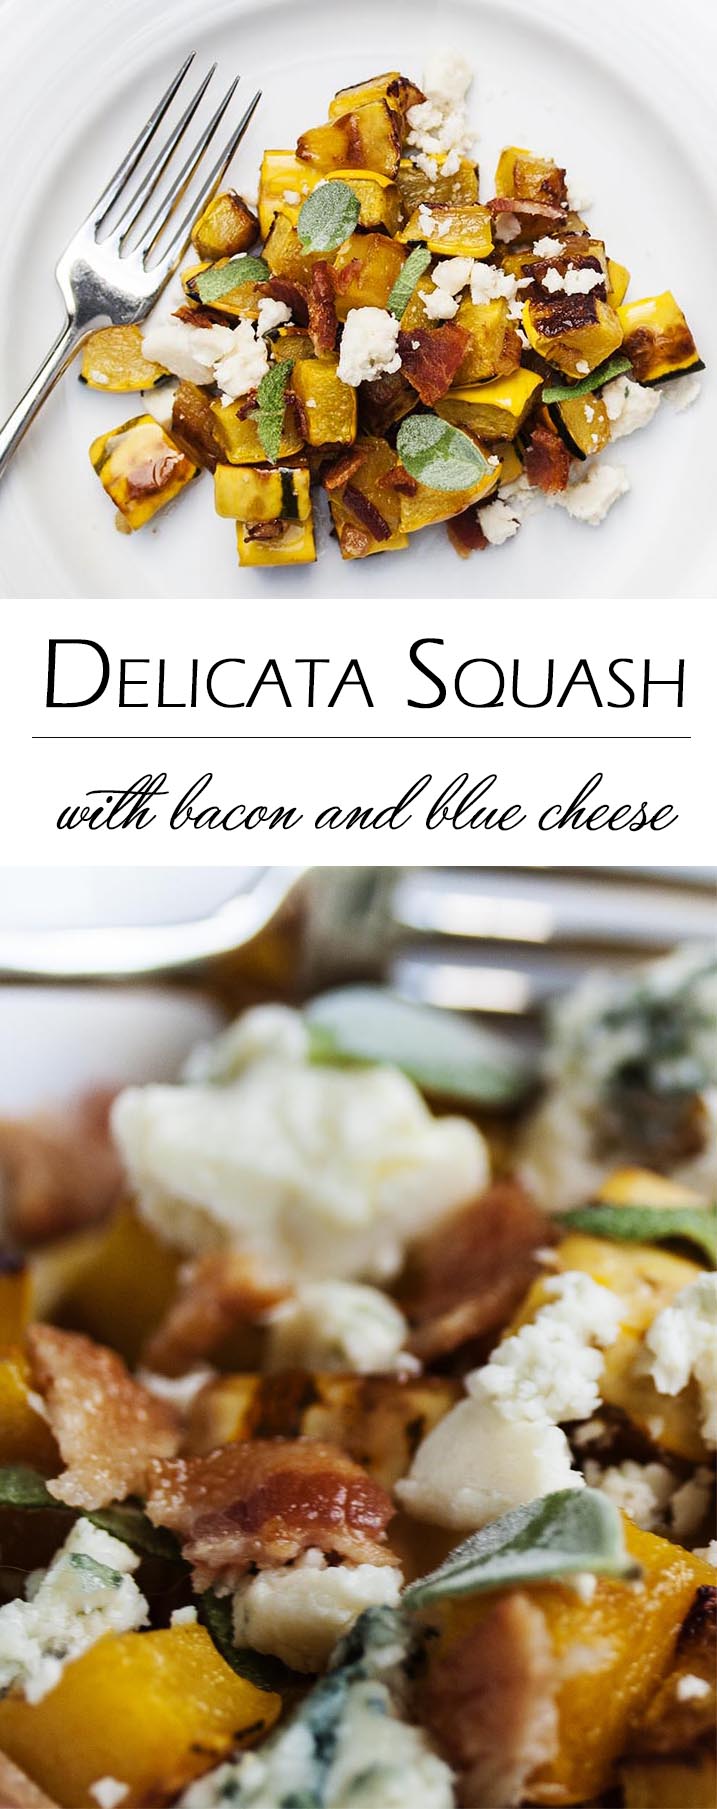 Delicata Squash With Bacon and Blue Cheese - Delicata squash is roasted and then tossed with bacon, blue cheese, and sage. I love it as a fall or Thanksgiving side dish. | justalittlebitofbacon.com